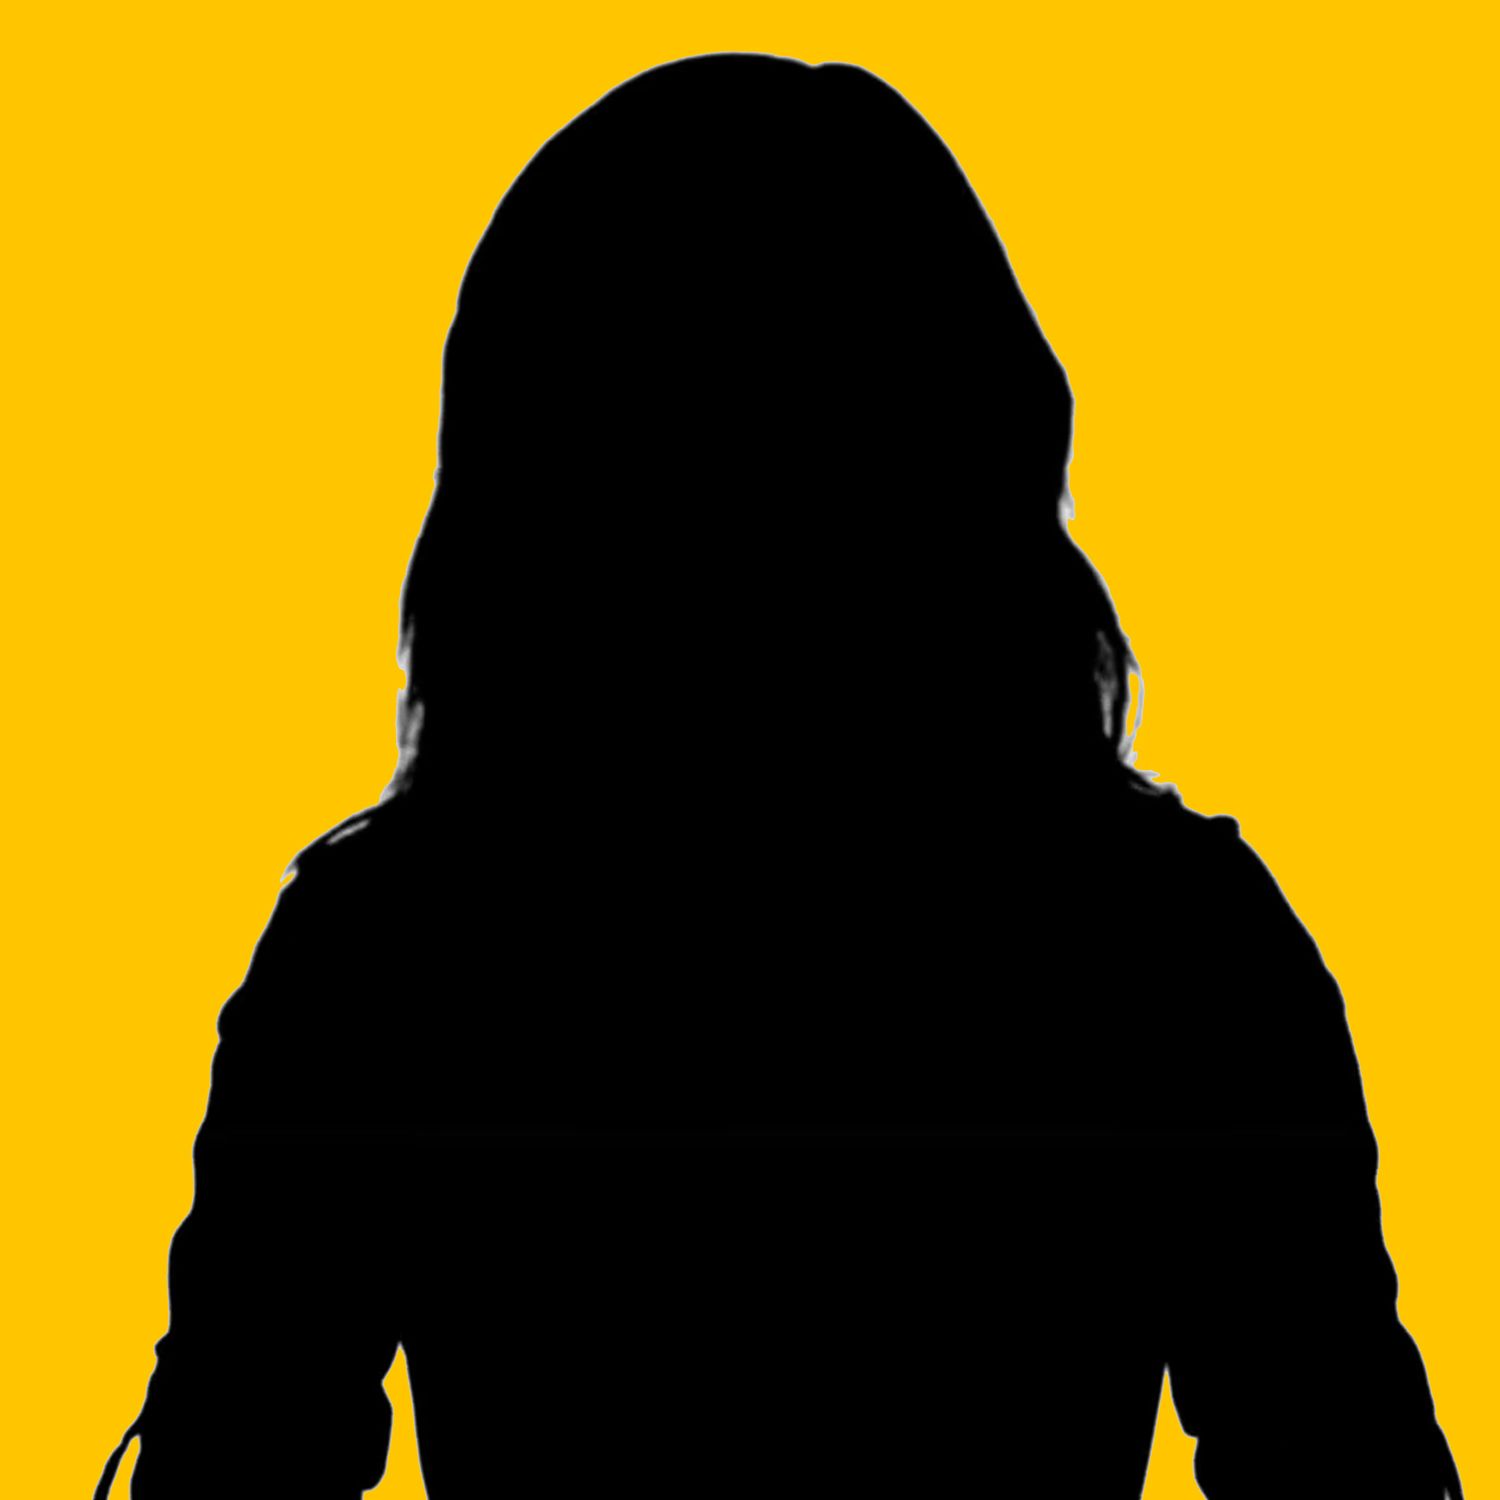 Private chef testimonial photo of  a  silhouette of a woman without a face on a yellow background.